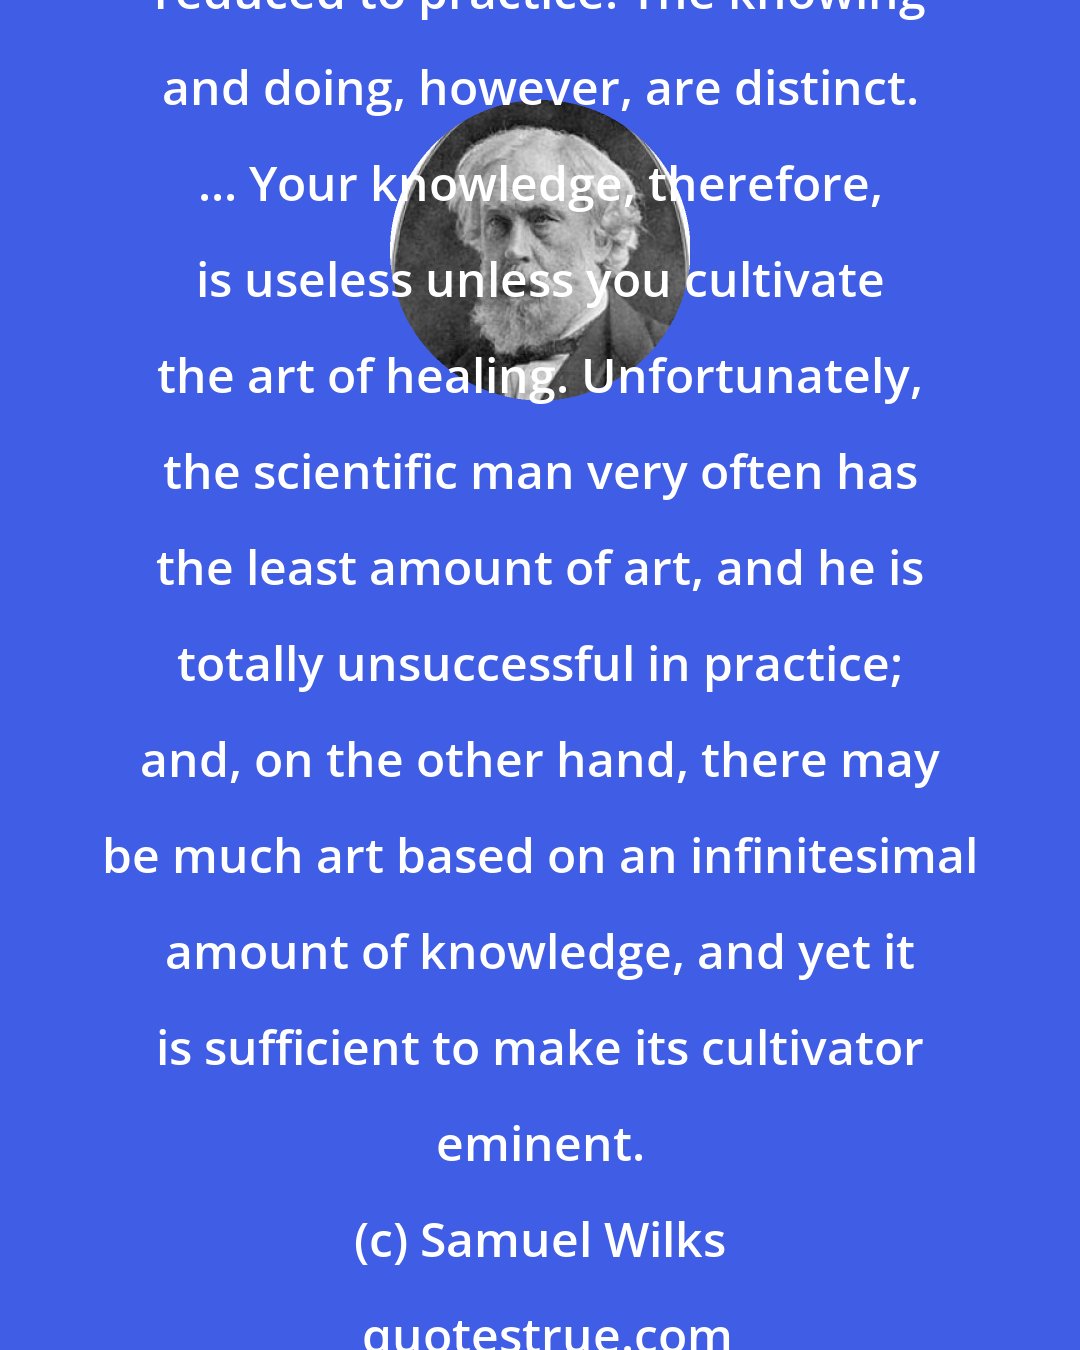 Samuel Wilks: We profess to teach the principles and practice of medicine, or, in other words, the science and art of medicine. Science is knowledge reduced to principles; art is knowledge reduced to practice. The knowing and doing, however, are distinct. ... Your knowledge, therefore, is useless unless you cultivate the art of healing. Unfortunately, the scientific man very often has the least amount of art, and he is totally unsuccessful in practice; and, on the other hand, there may be much art based on an infinitesimal amount of knowledge, and yet it is sufficient to make its cultivator eminent.